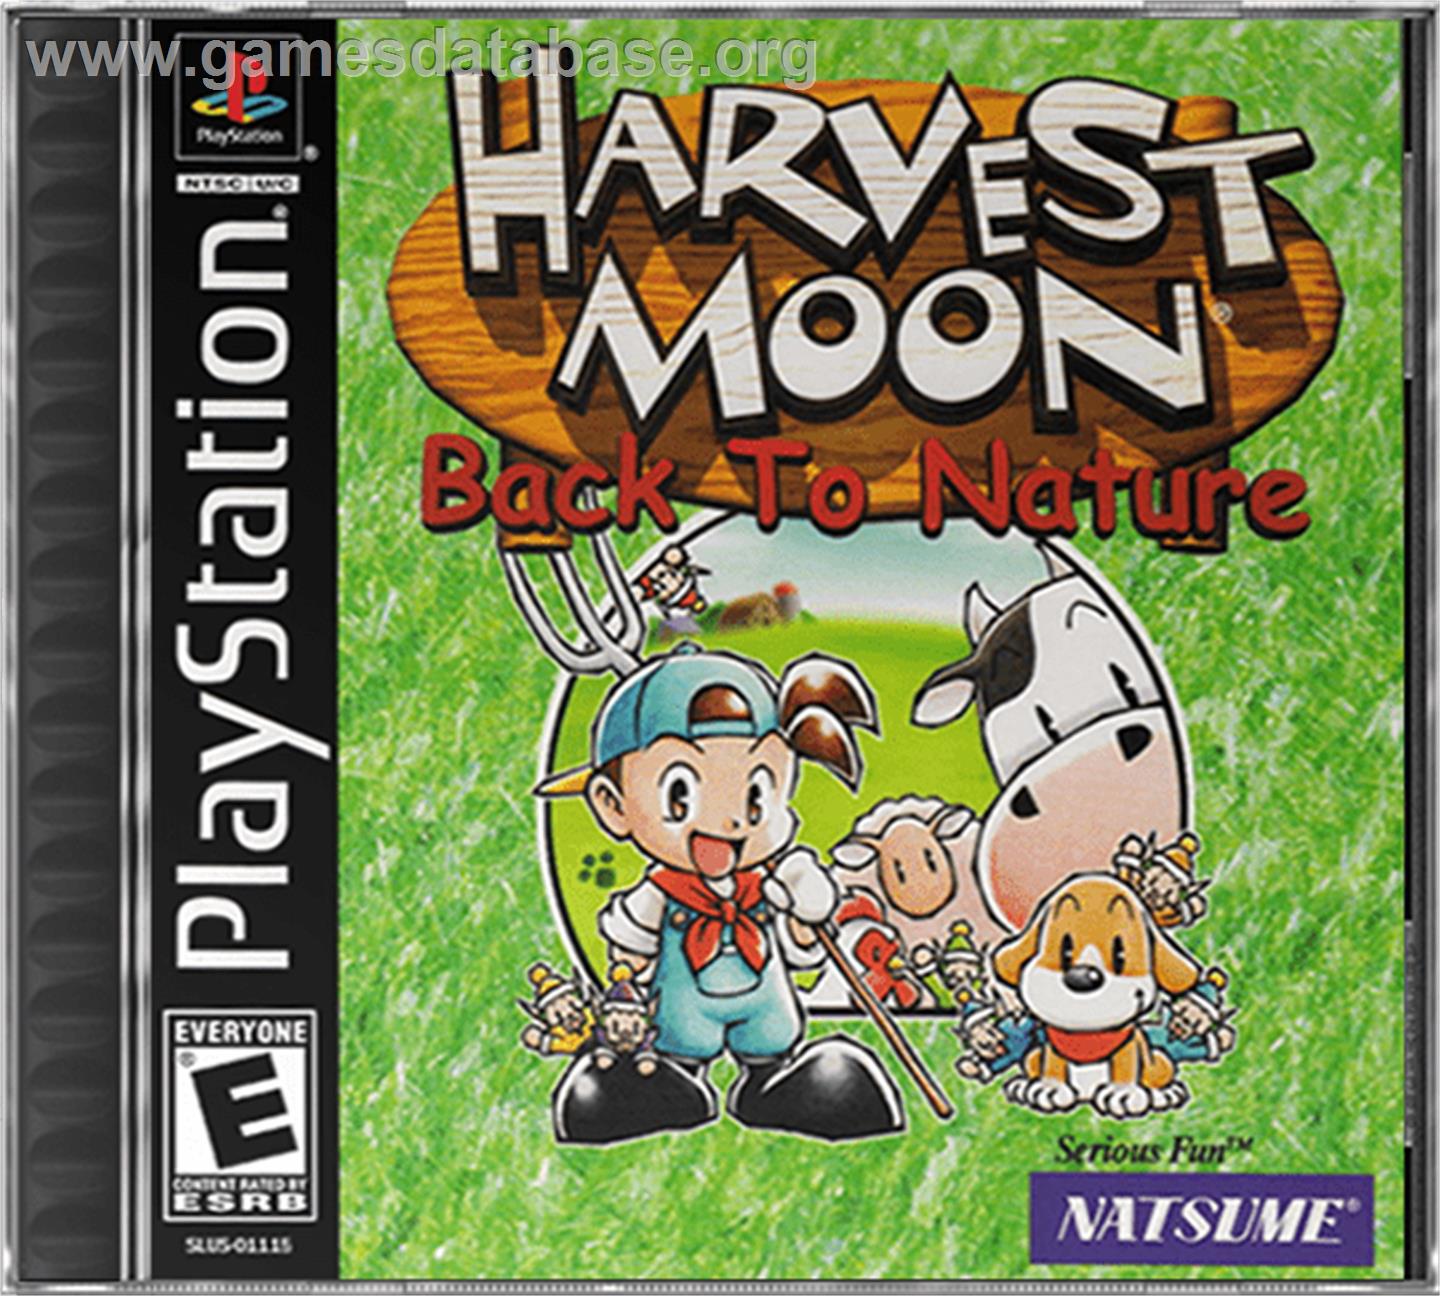 Harvest Moon: Back to Nature - Sony Playstation - Artwork - Box